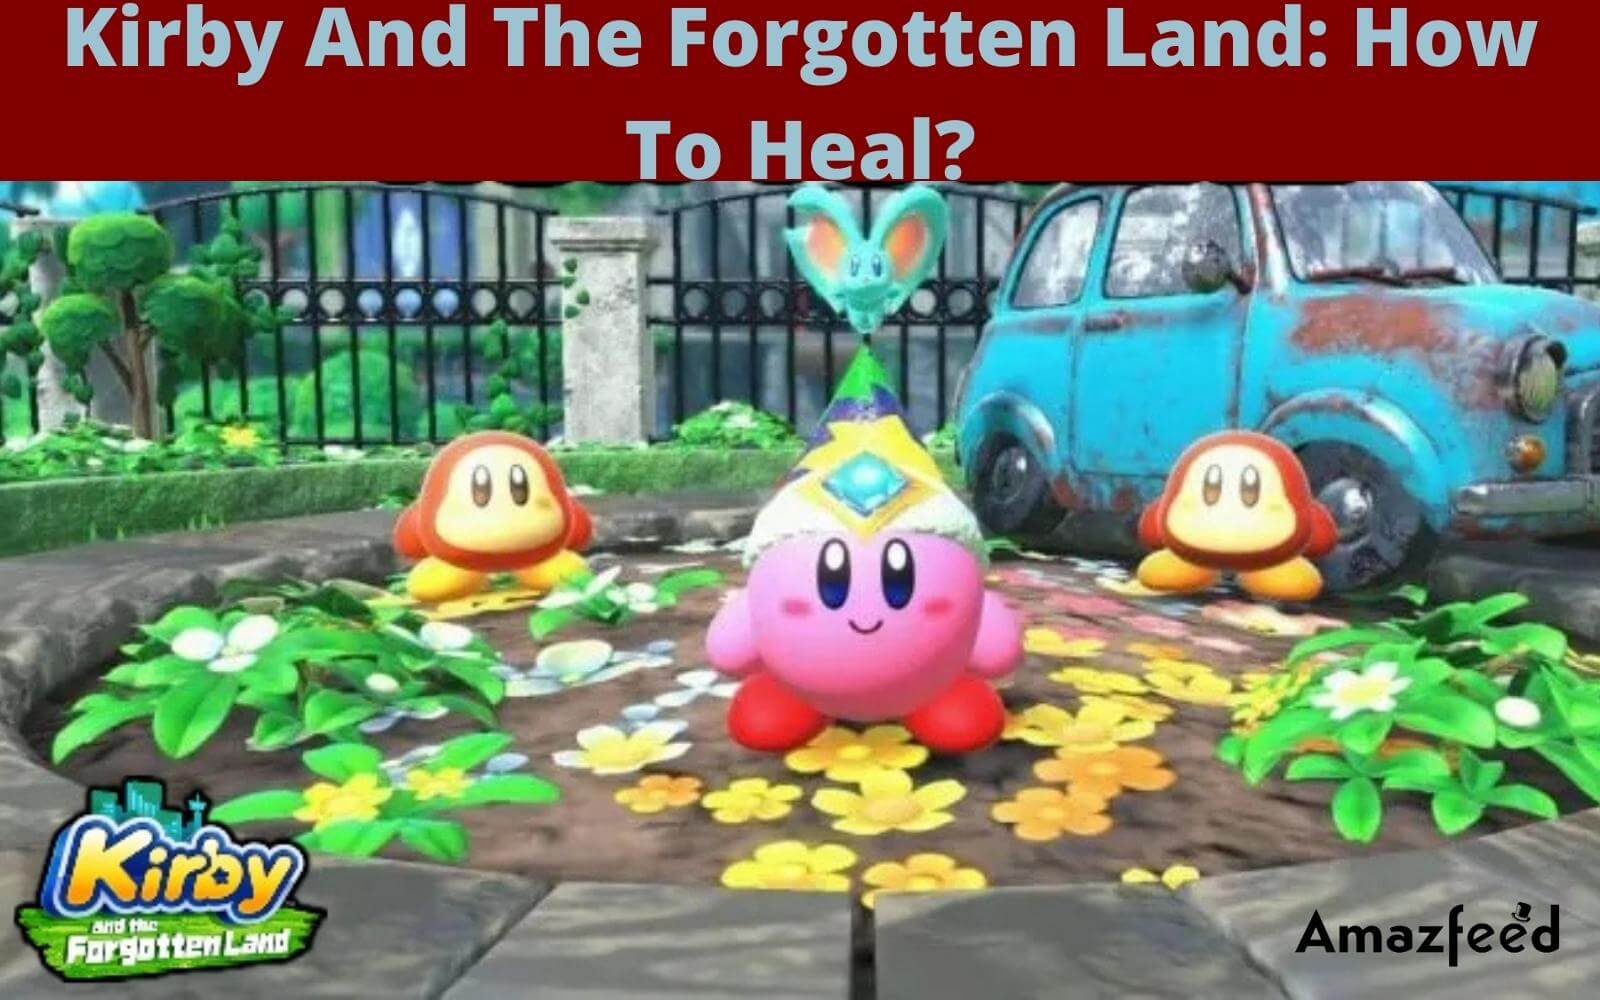 Kirby And The Forgotten Land: How To Heal